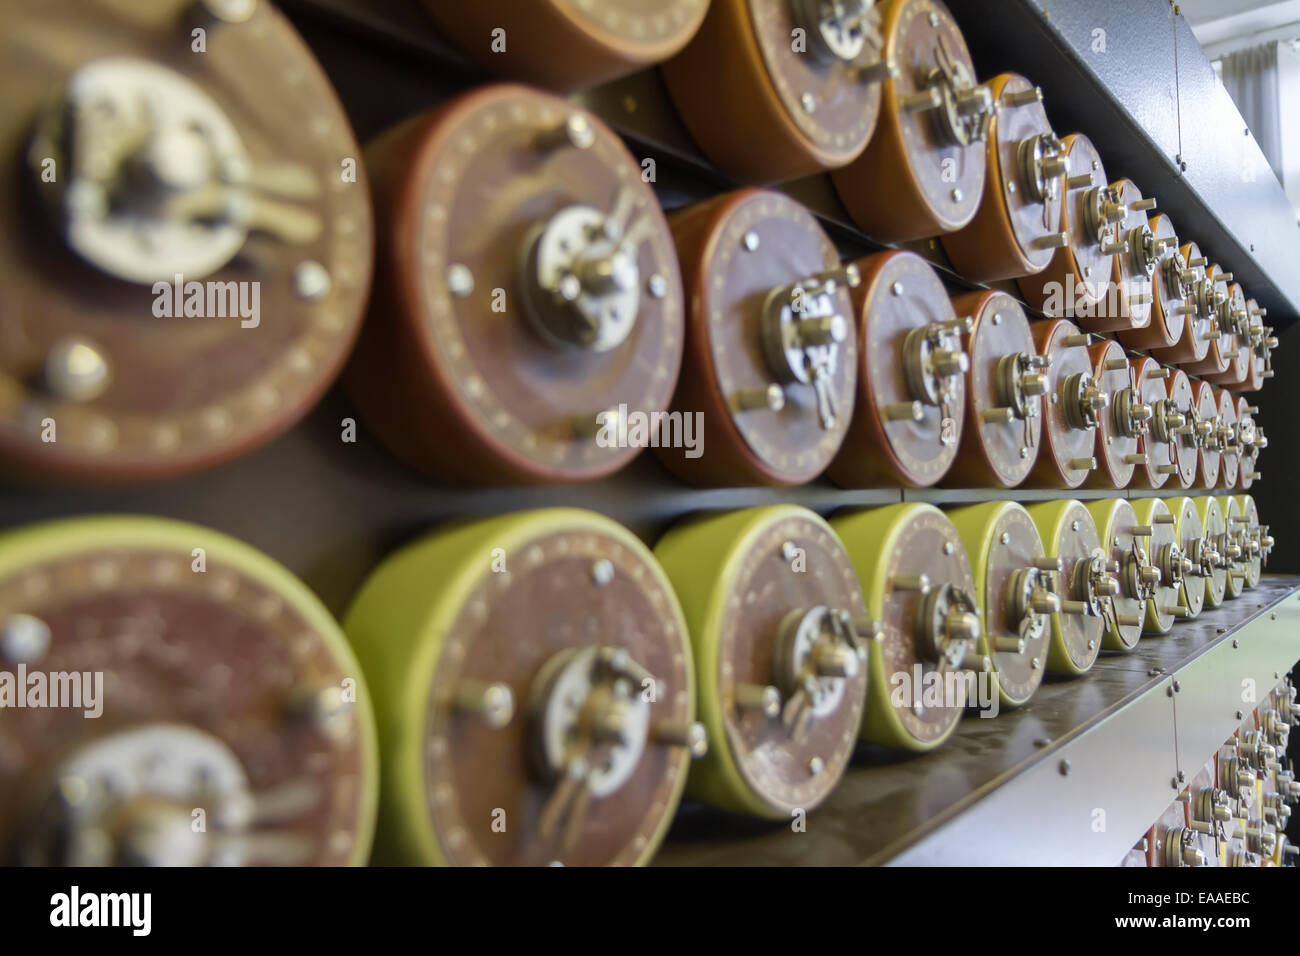 Rebuild of Turing Bombe at Bletchley Park, used to help decipher WWII German-Enigma-Machine-encrypted secret messages. Rotor drums. Stock Photo